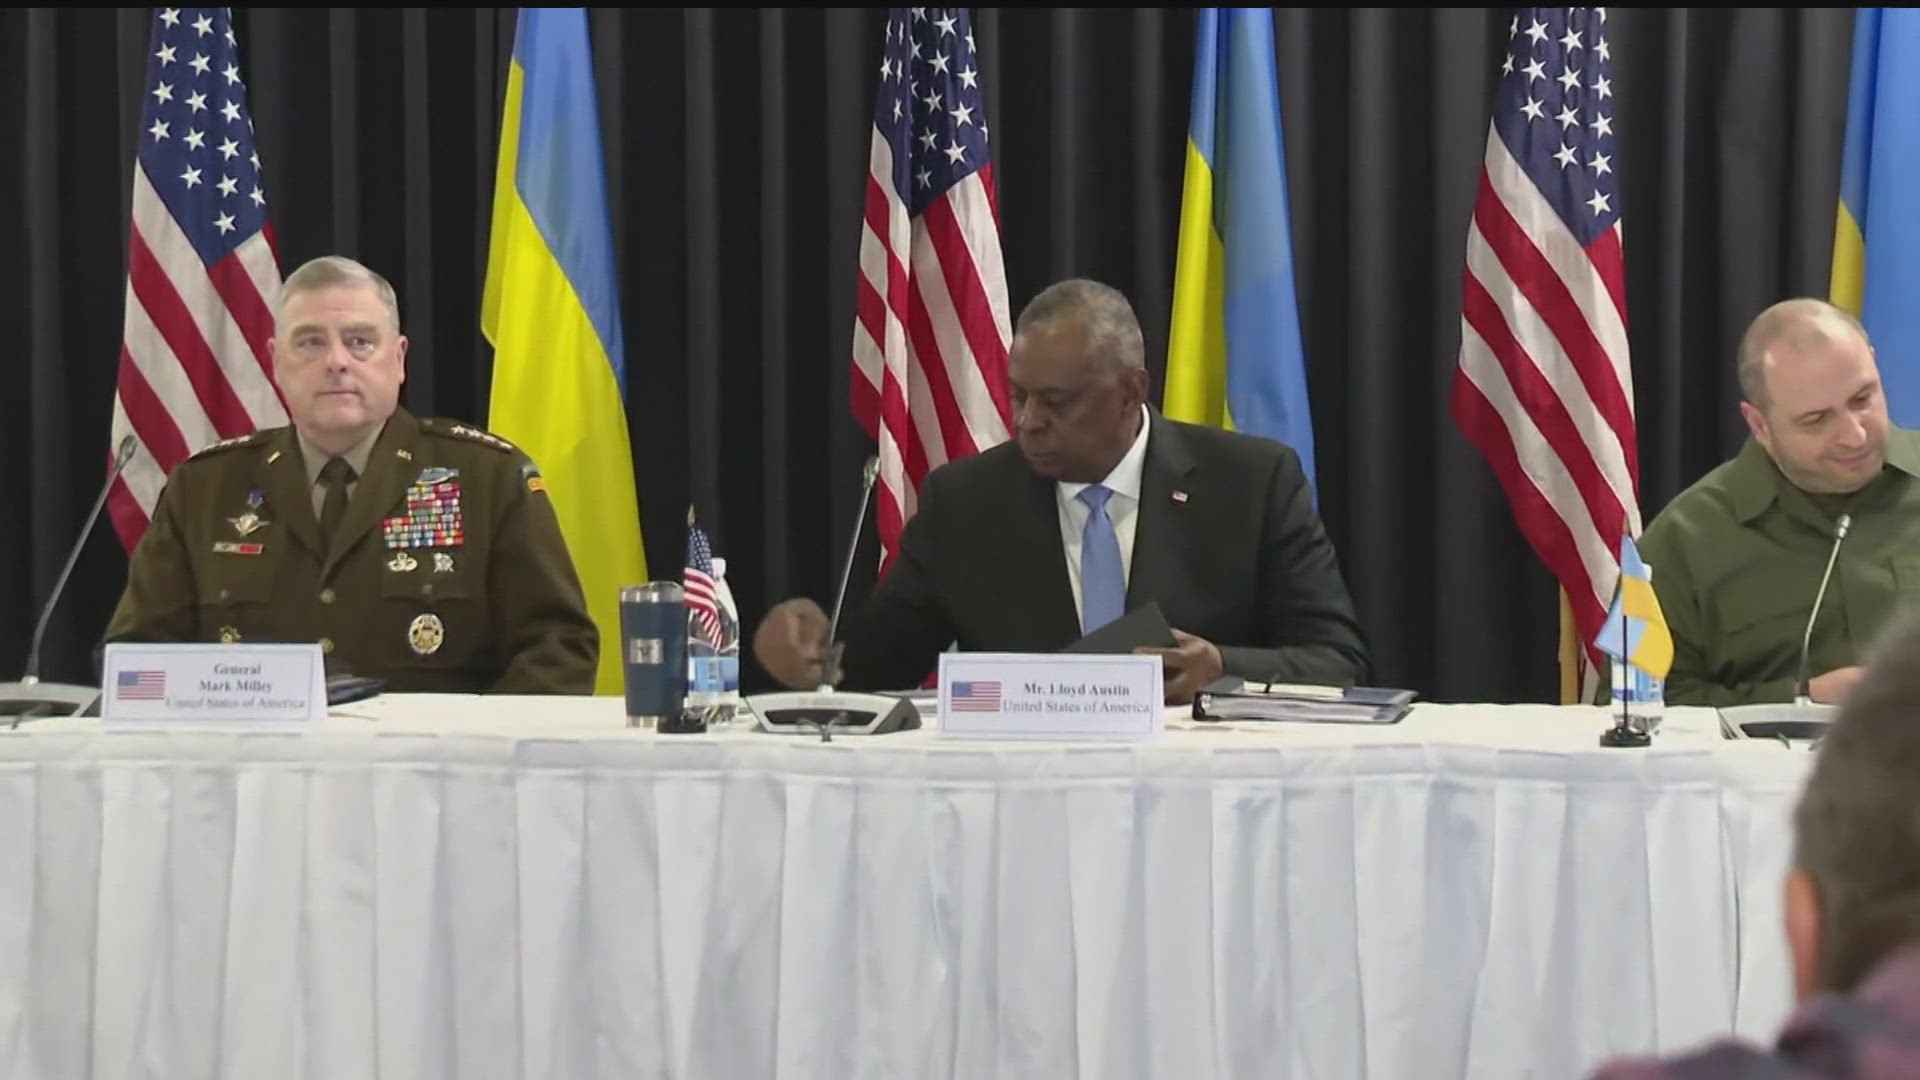 U.S. Secretary of Defense Lloyd Austin commented on the war in Ukraine while at a meeting in Germany.